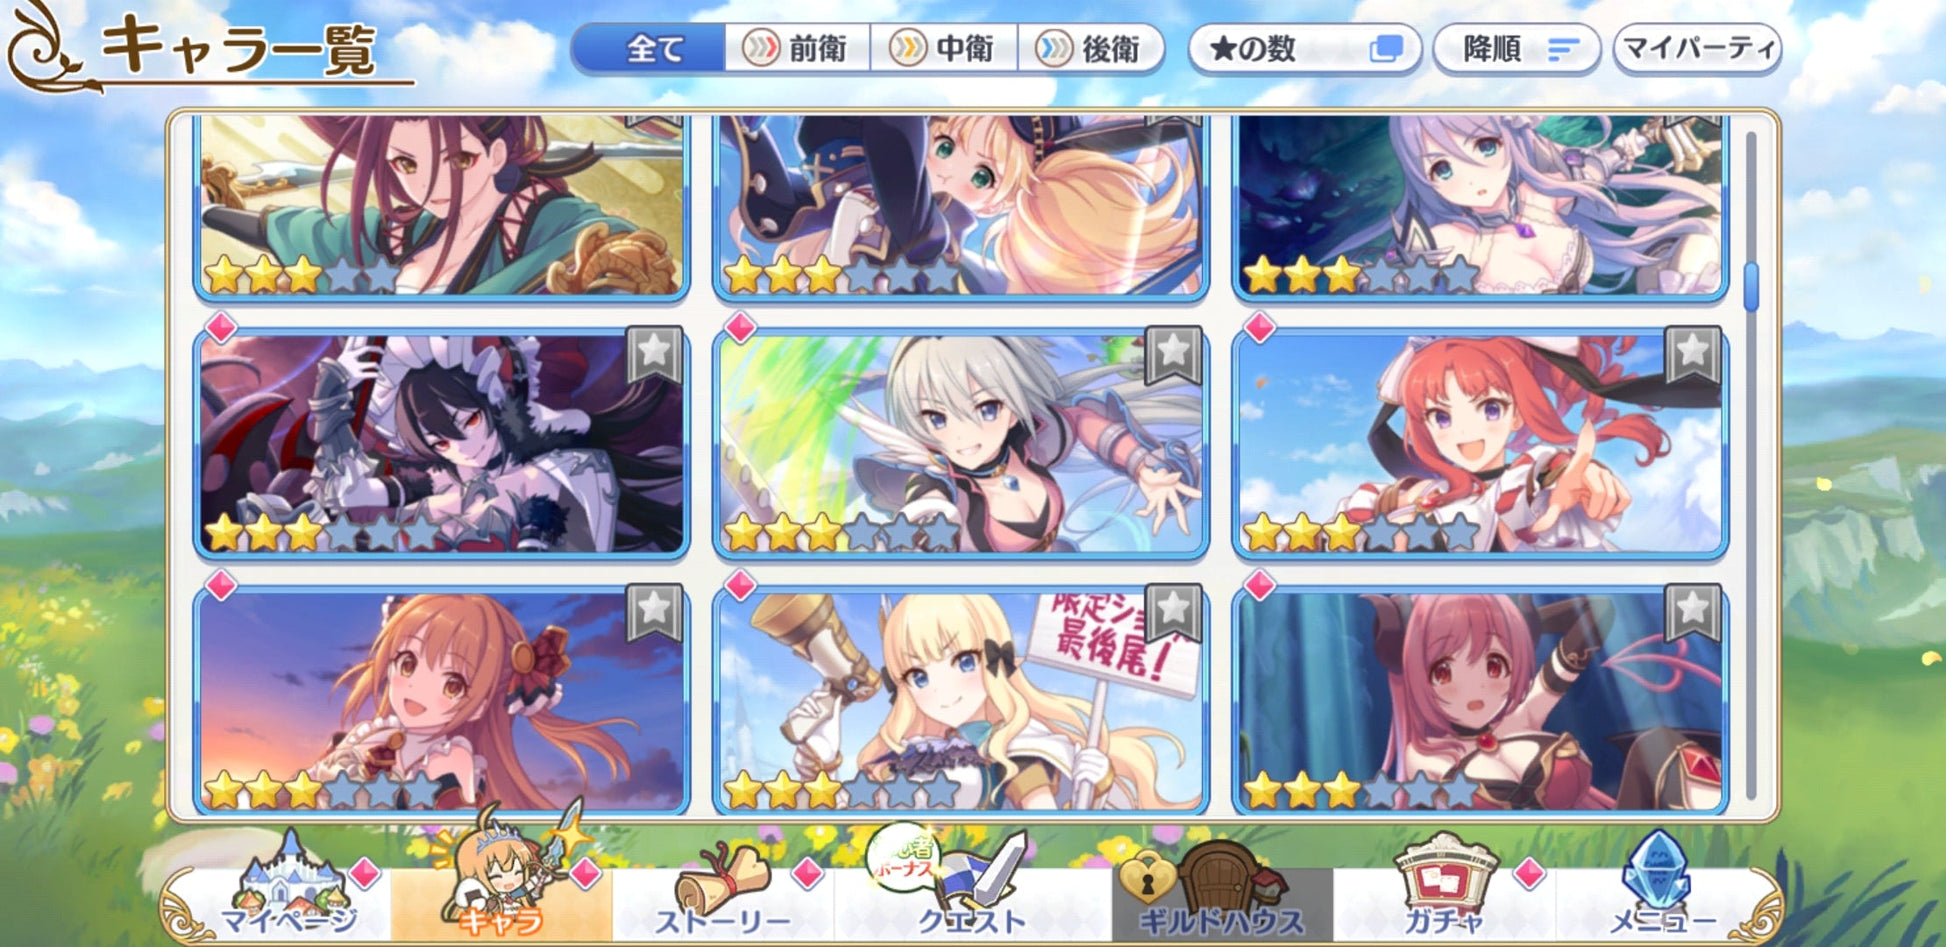 [JP][INSTANT] Priconne 38x3* +200k Jewels 6x3* tickets Starter Account Princess Connect Re:Dive-Mobile Games Starter